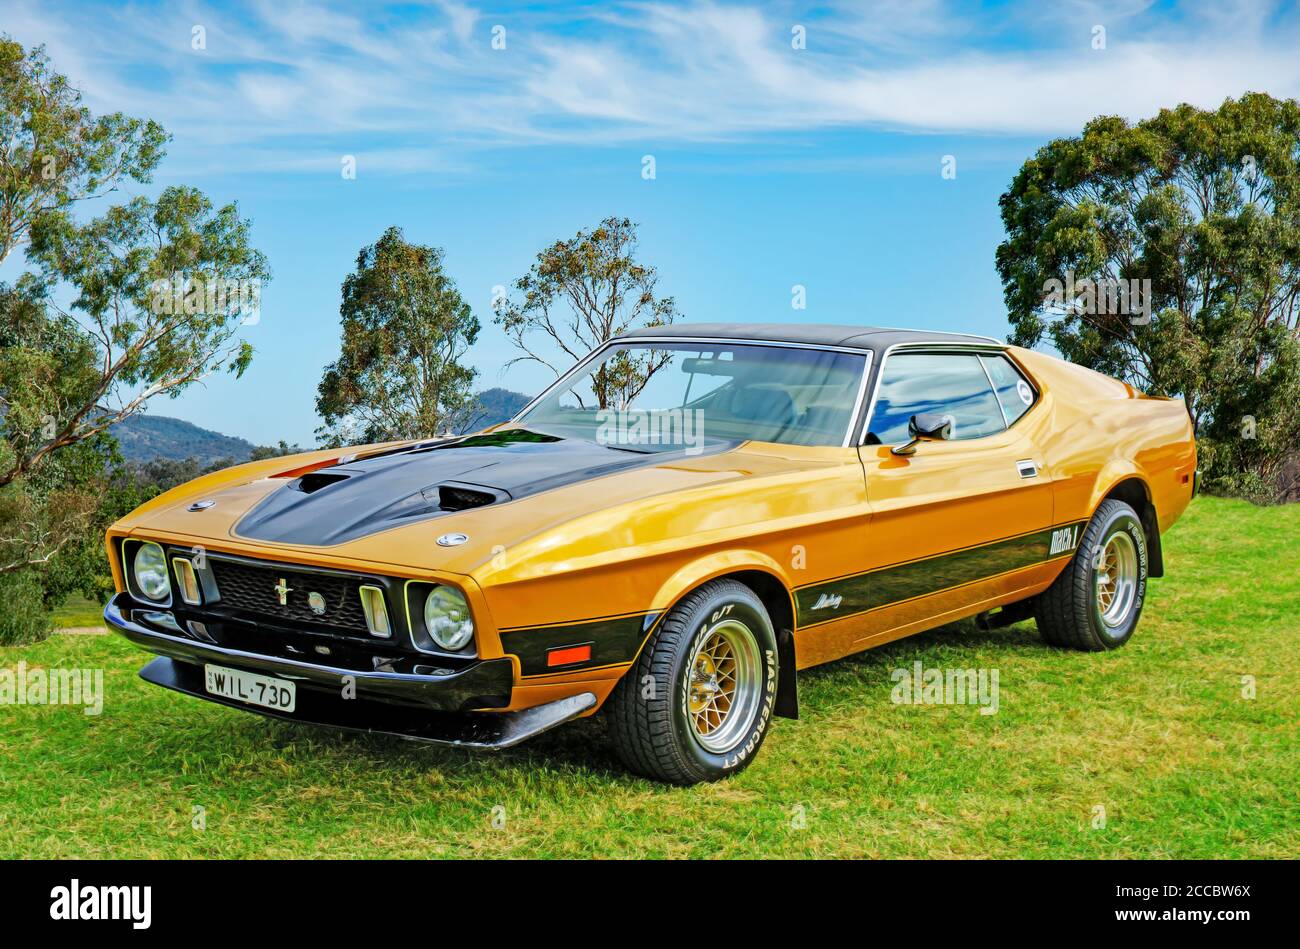 1973 Ford Mach 1 Mustang. Stock Photo